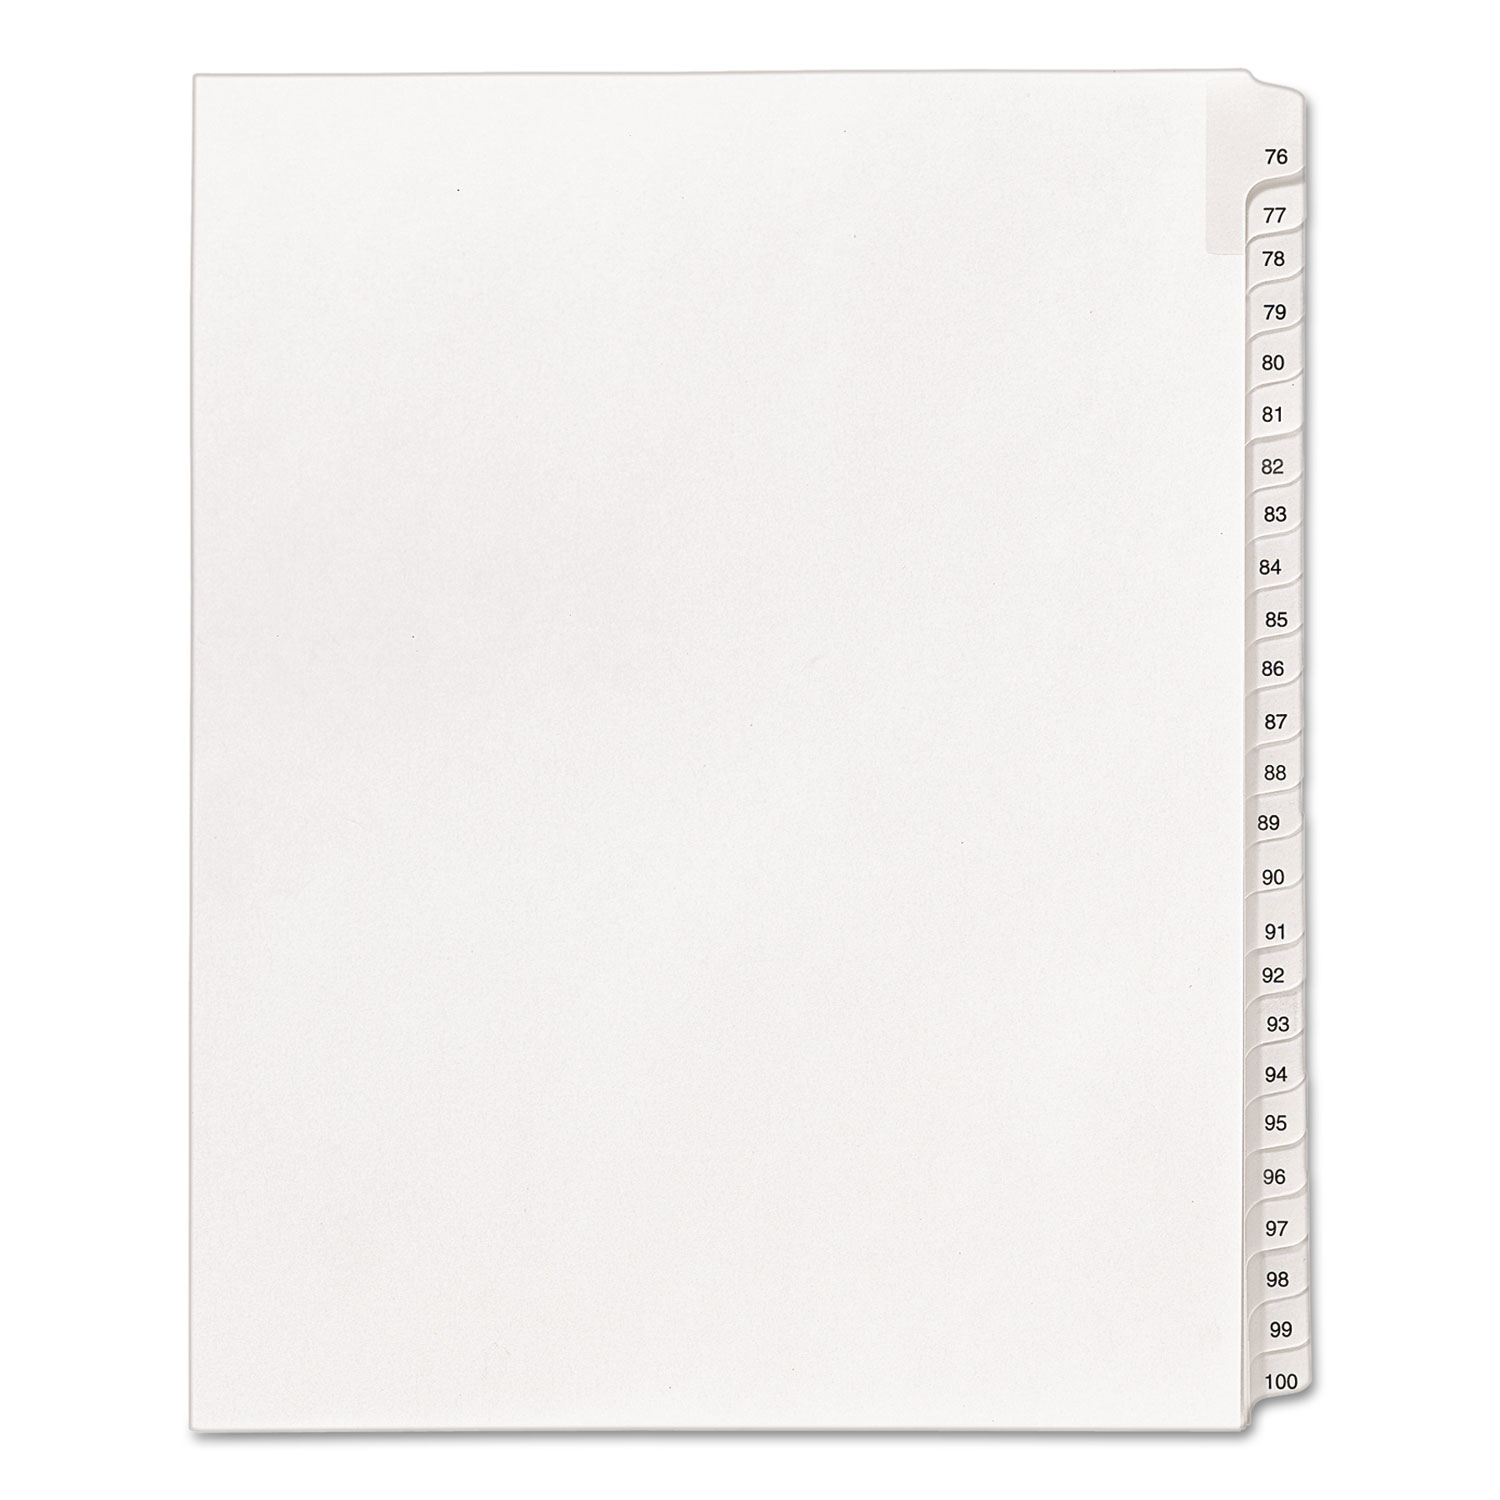  Avery 01704 Preprinted Legal Exhibit Side Tab Index Dividers, Allstate Style, 25-Tab, 76 to 100, 11 x 8.5, White, 1 Set (AVE01704) 